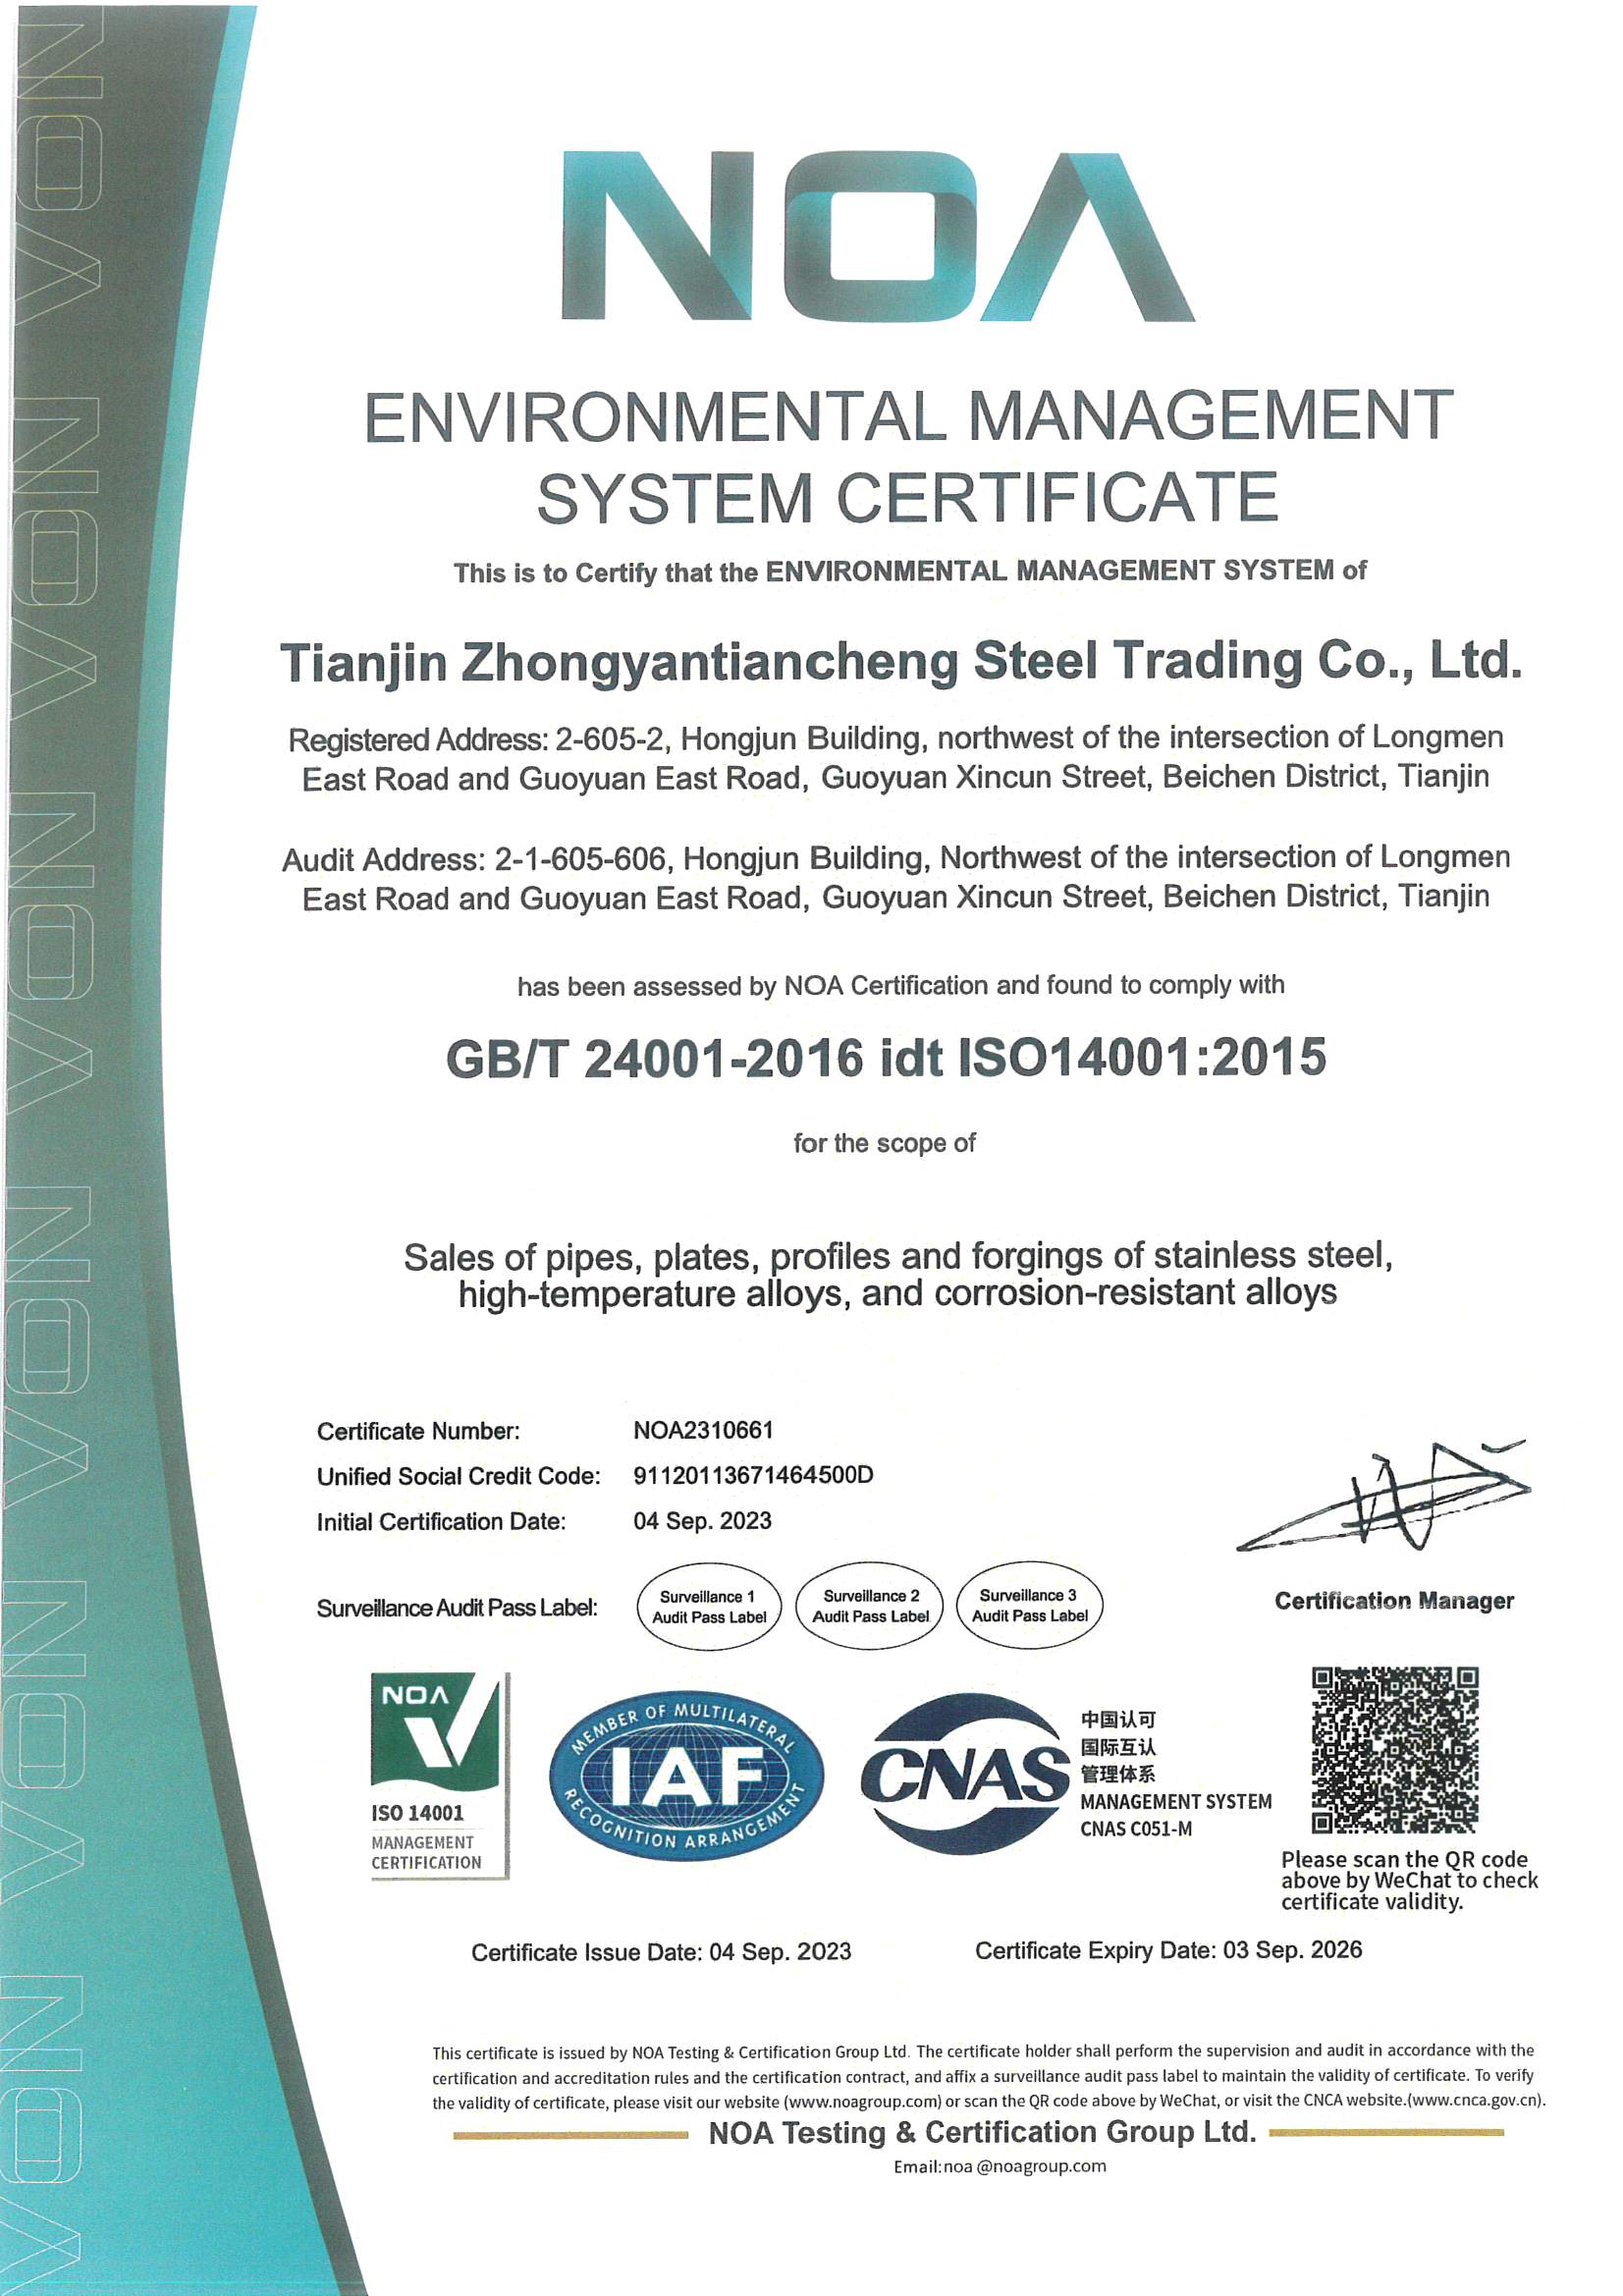 ISO14001:2015 ENVIRONMENTAL MANAGEMENT SYSTEM CERTIFICATE